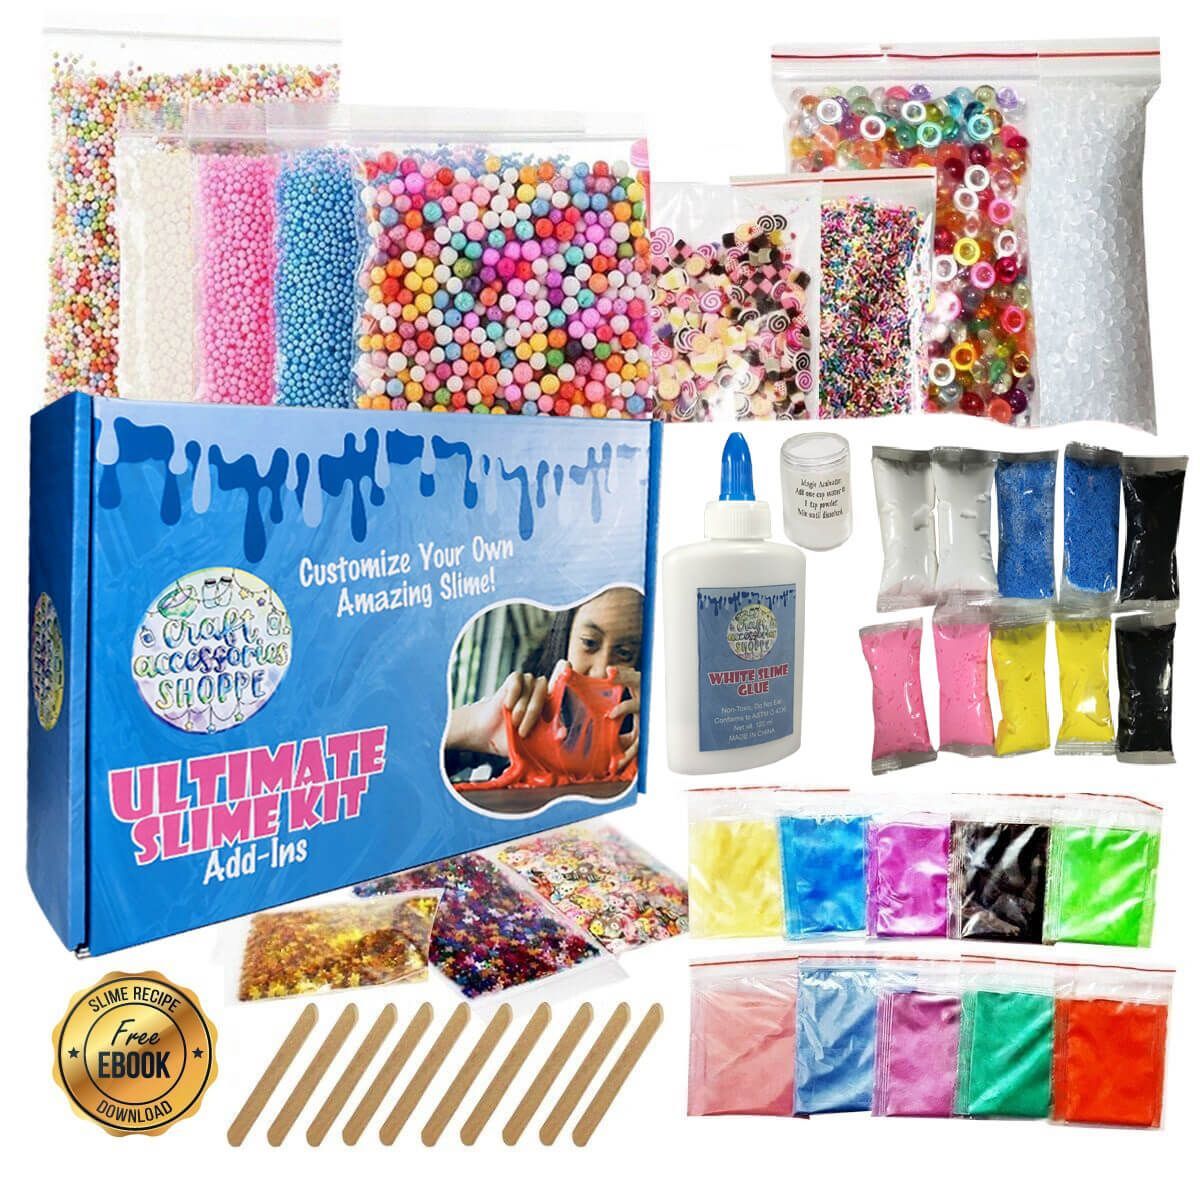 Craft Accessories Shoppe - Ultimate Slime Kit for Girls and Boys | Slime Kit with Slime Supplies | Complete DIY Slime Making Kit | Includes Slime Ingredients, 10 Colors, 8 Different Add-Ins | Colorful Slime Kits for Family Fun - Walmart.com - Craft Accessories Shoppe - Ultimate Slime Kit for Girls and Boys | Slime Kit with Slime Supplies | Complete DIY Slime Making Kit | Includes Slime Ingredients, 10 Colors, 8 Different Add-Ins | Colorful Slime Kits for Family Fun - Walmart.com -   19 diy Slime add ins ideas